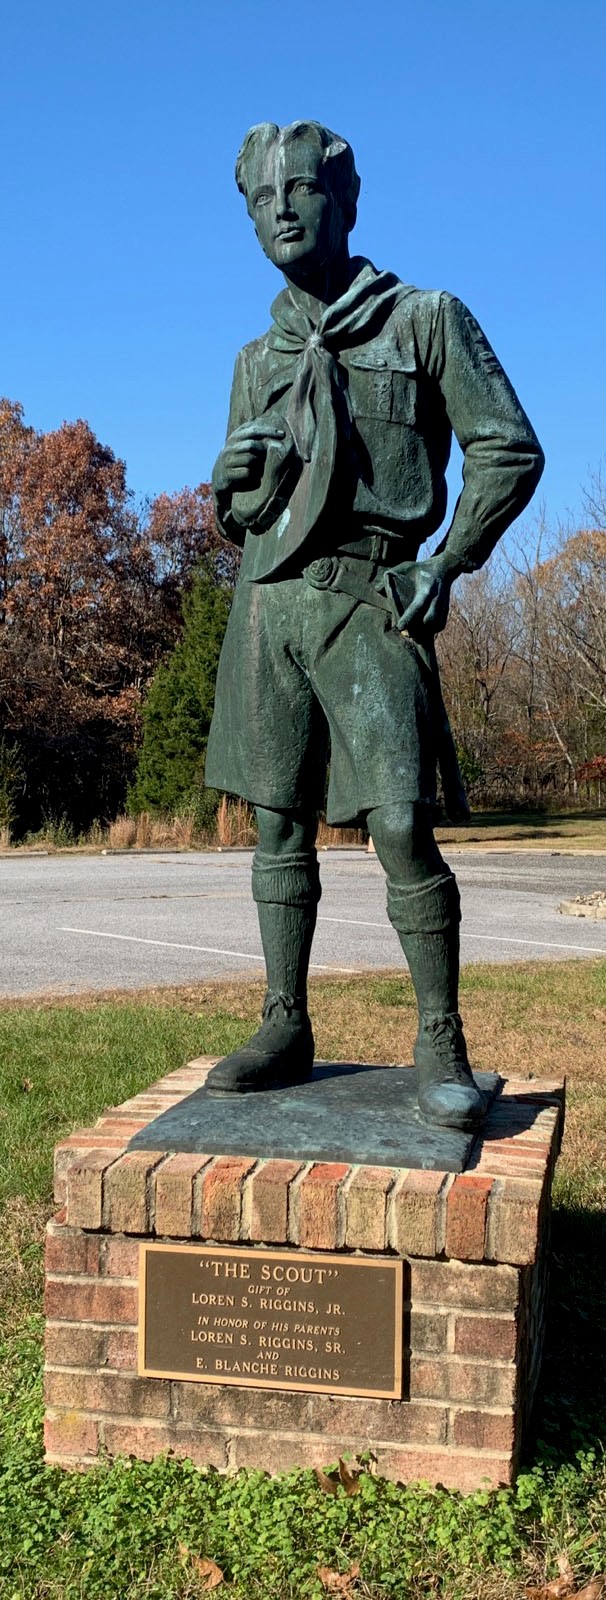 The Good Scout, a statue of a Scout in uniform that stands outside each of our Scout offices